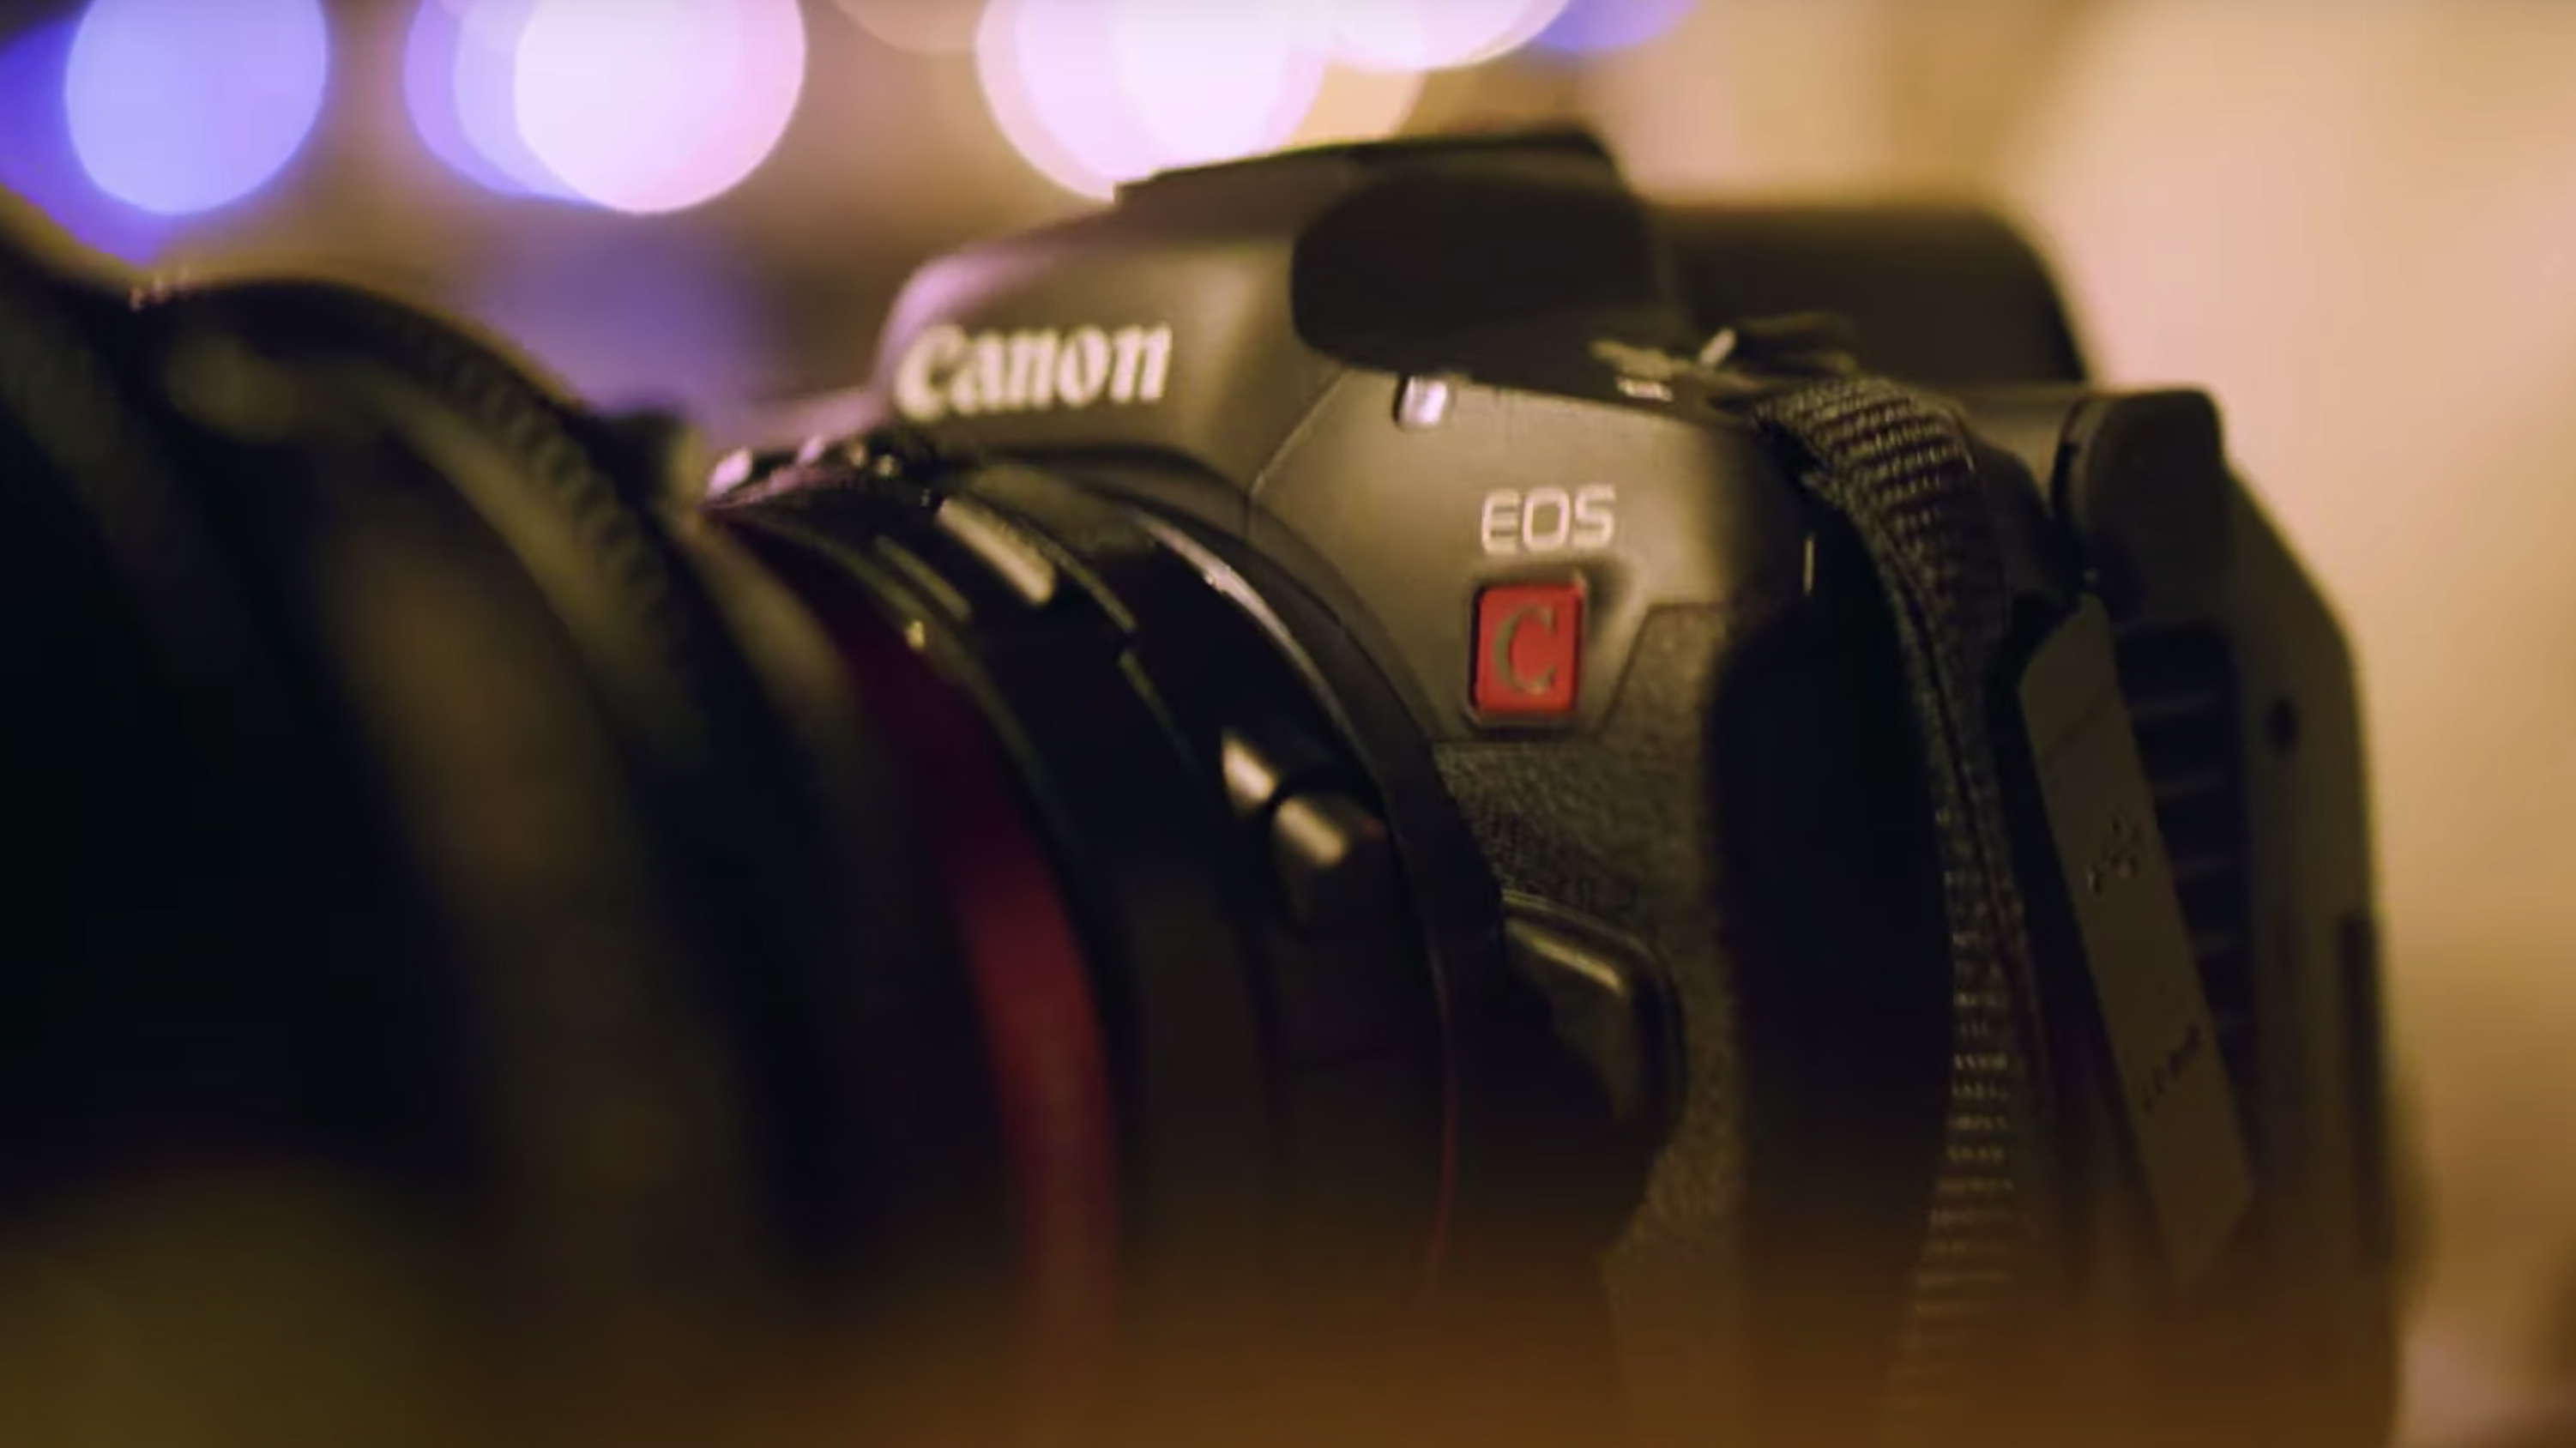 A close-up of the Canon EOS R5 C camera